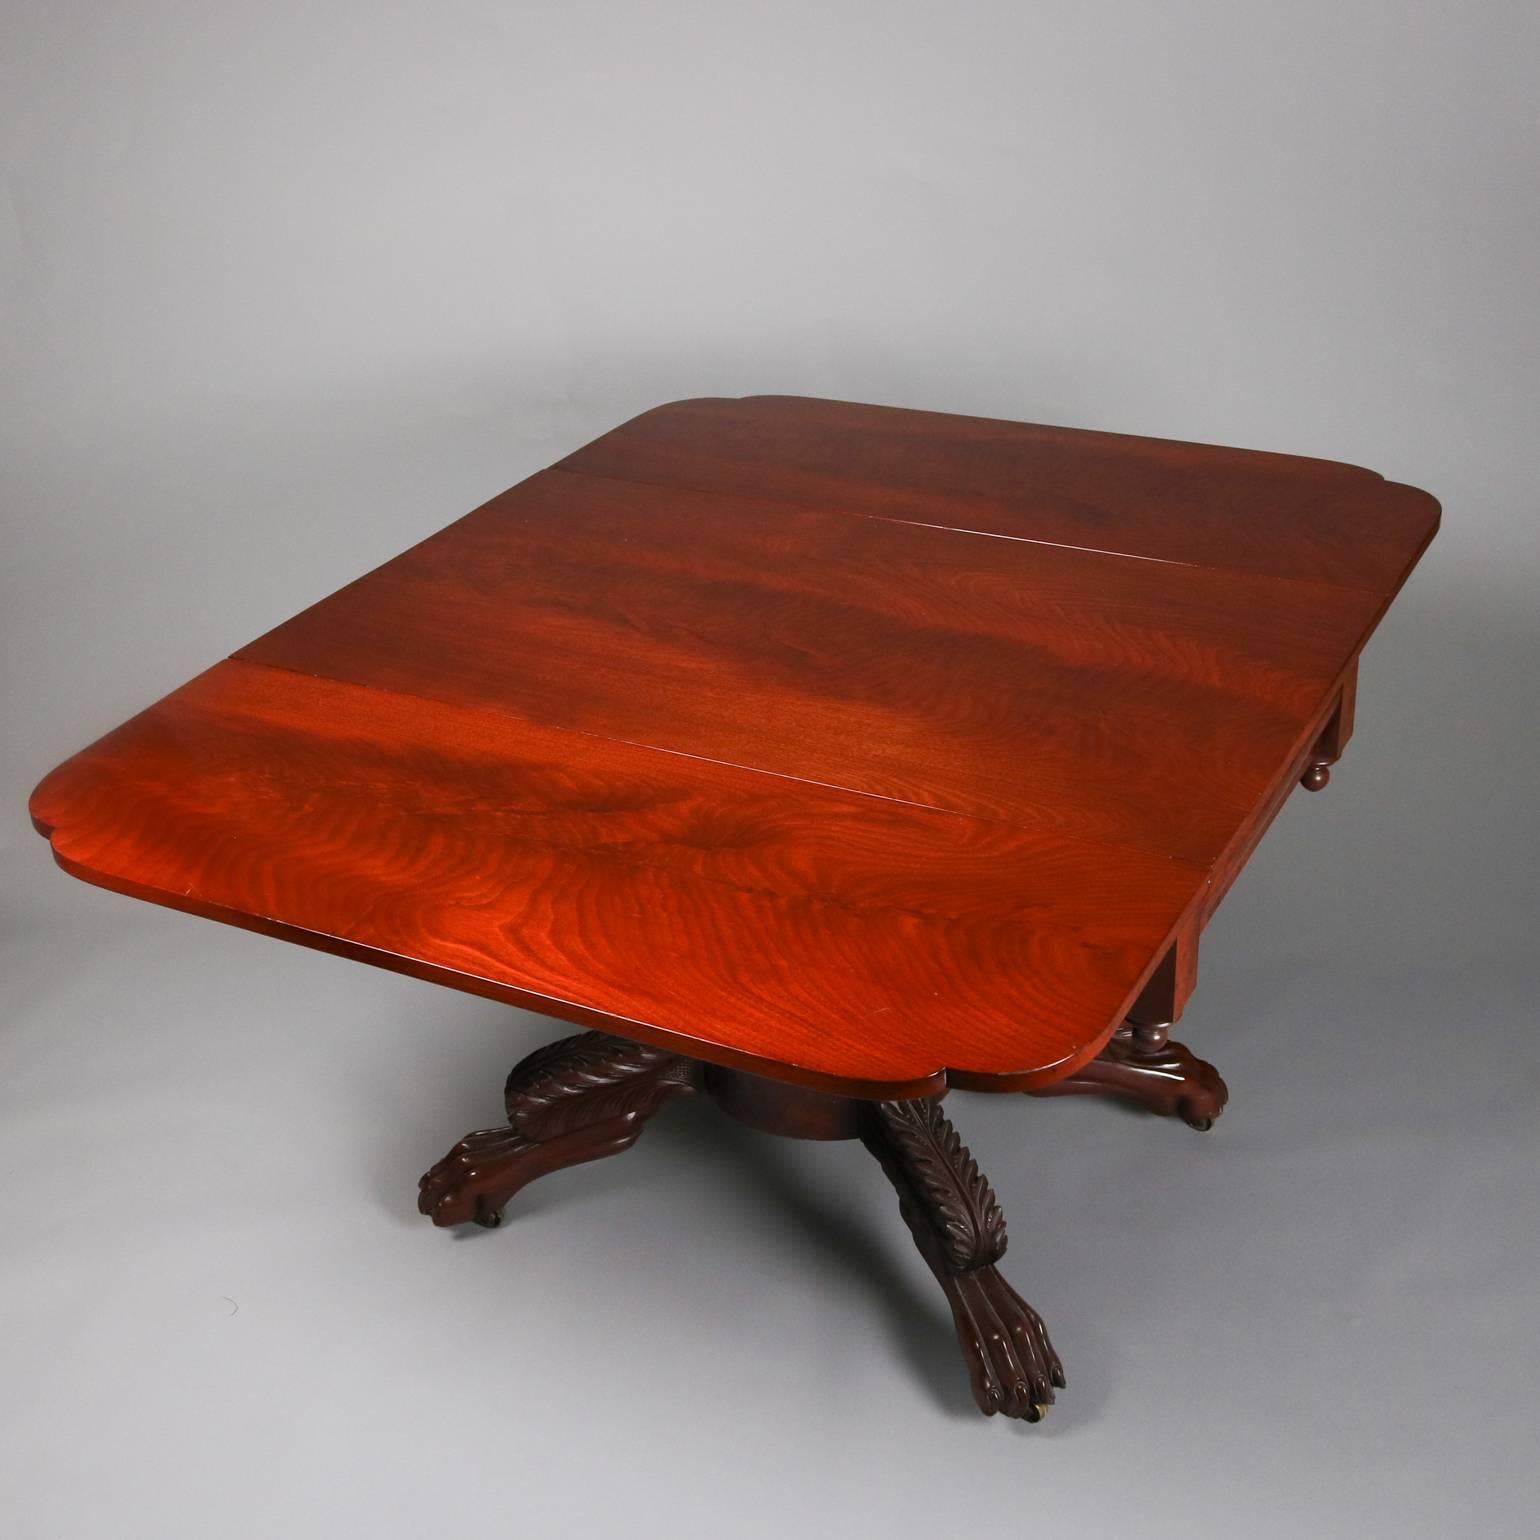 19th Century Antique Carved American Empire Flame Mahogany Pedestal Drop-Leaf Table